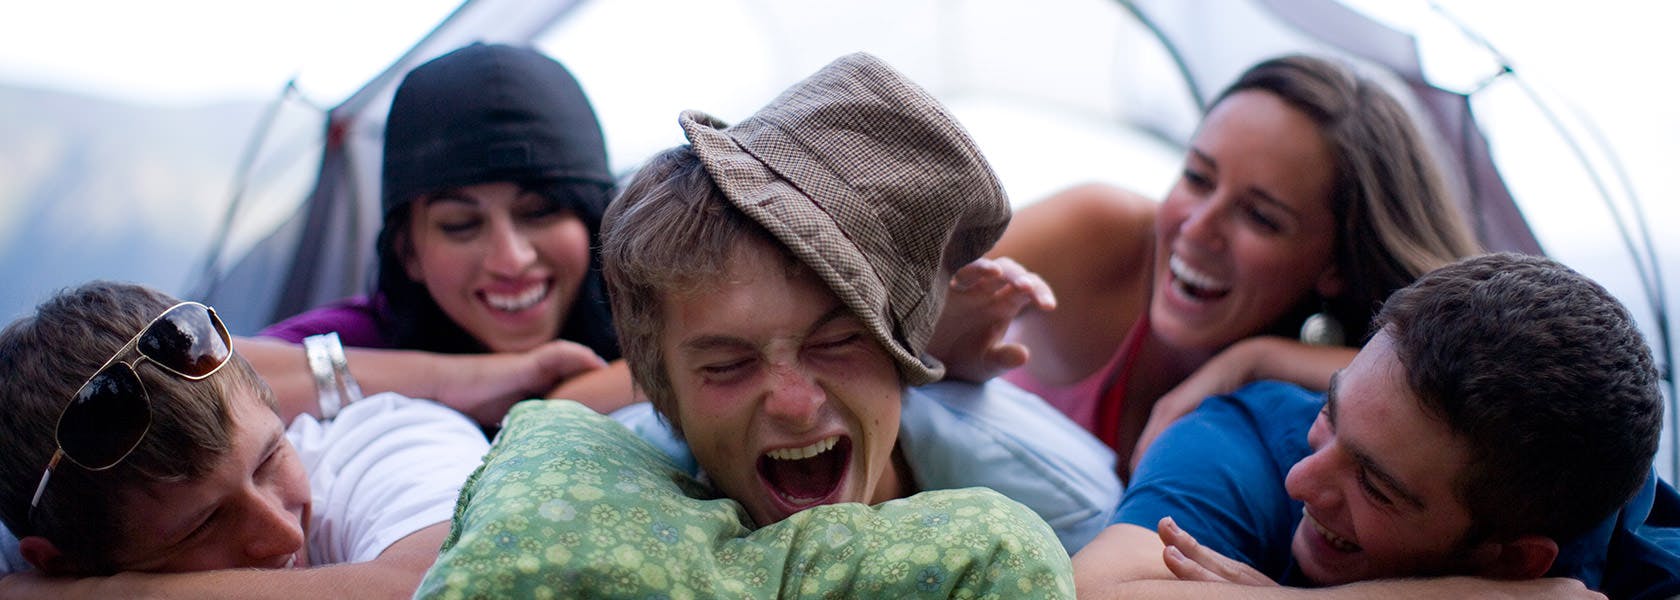 Friends Laugh As They Pile On Top Of Each Other During A Camping Trip 